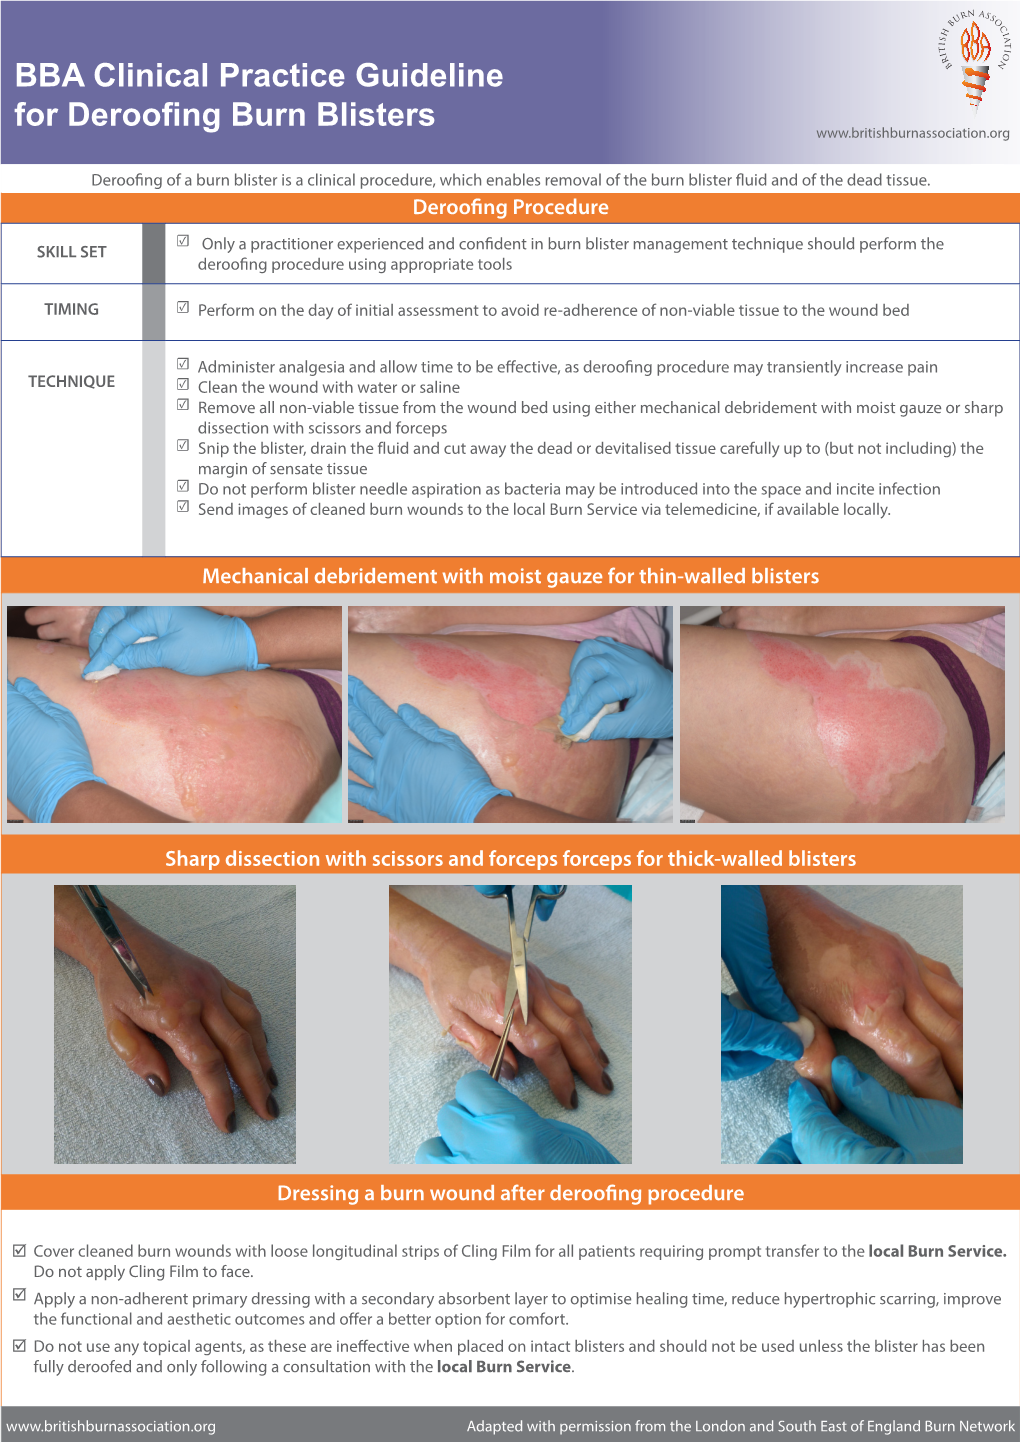 Download the BBA Guideline for Deroofing Burn Blisters